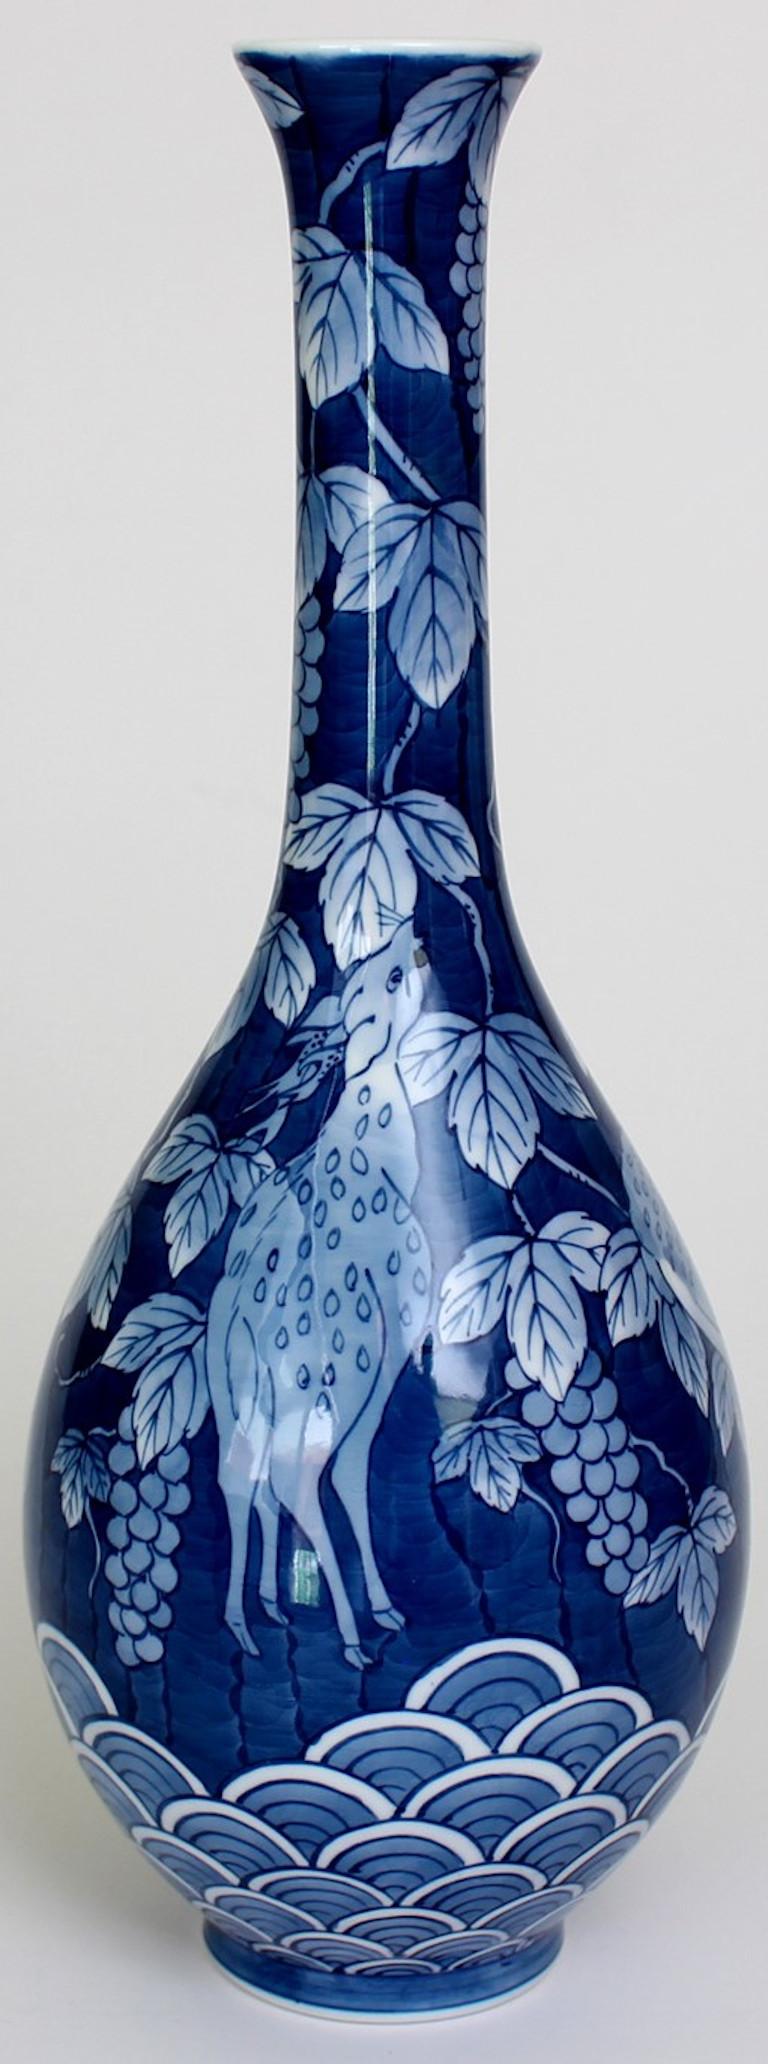 This hand painted contemporary porcelain vase created by an artist of the Imari-Arita region of Japan depicts a peaceful scene of deer at play in solid cobalt blue. The artist is the recipient of numerous awards for his signature gold and platinum